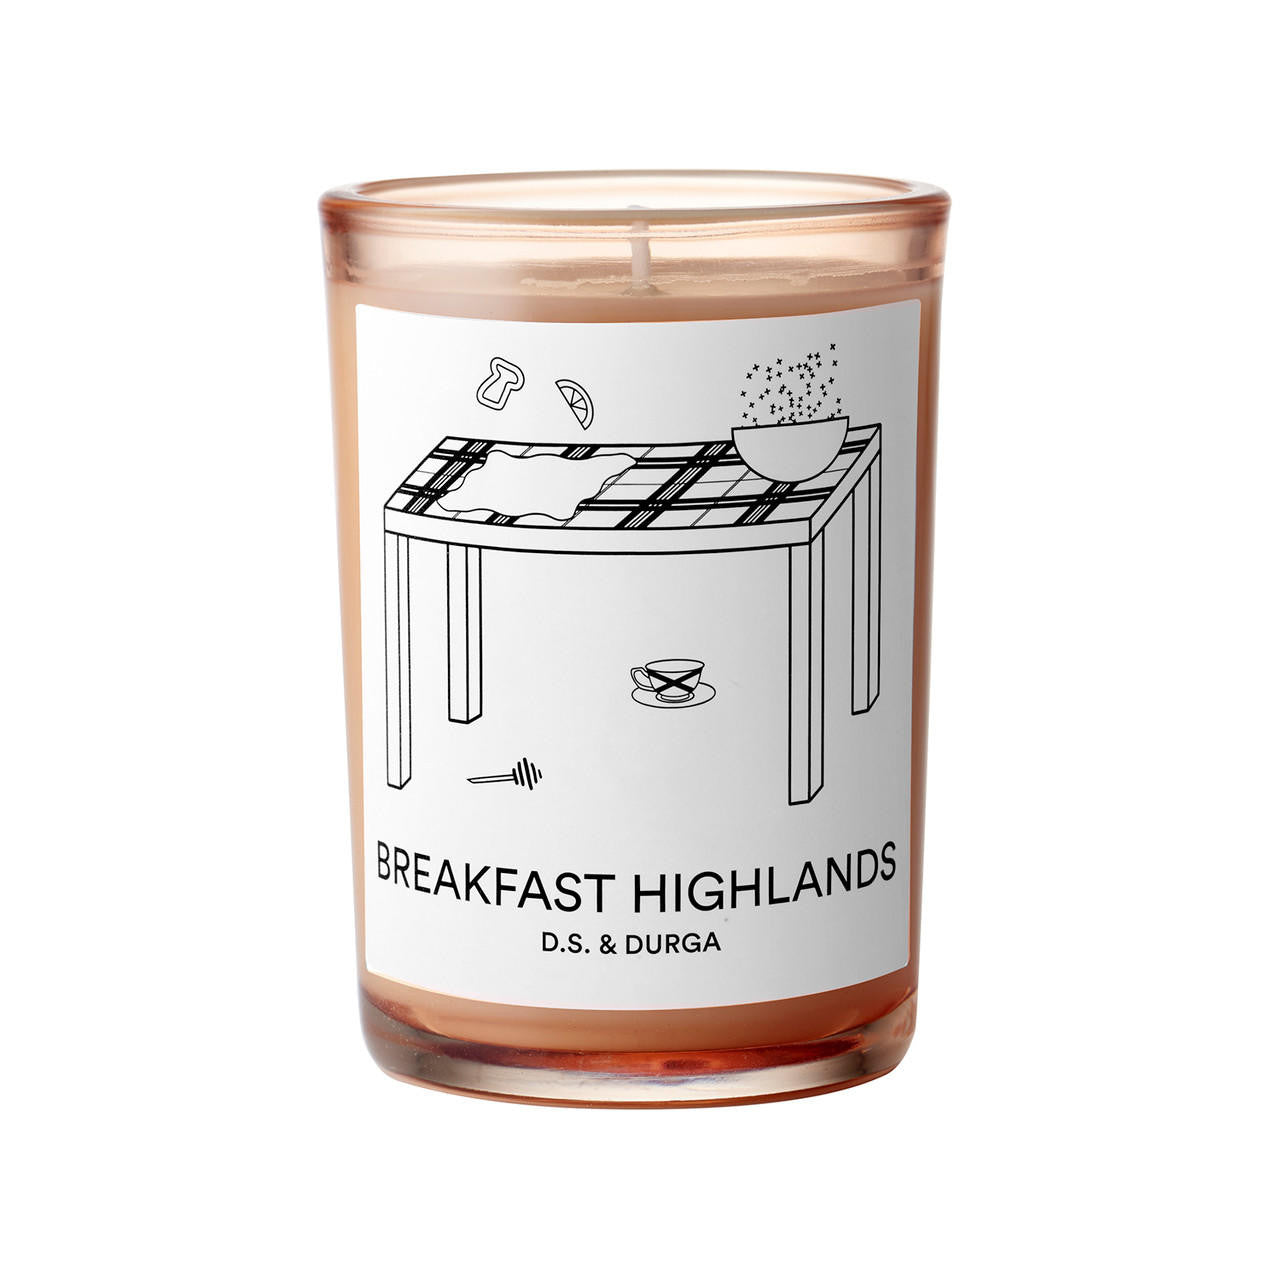 D.S. and DURGA D.S. & DURGA BREAKFAST HIGHLANDS Candle 